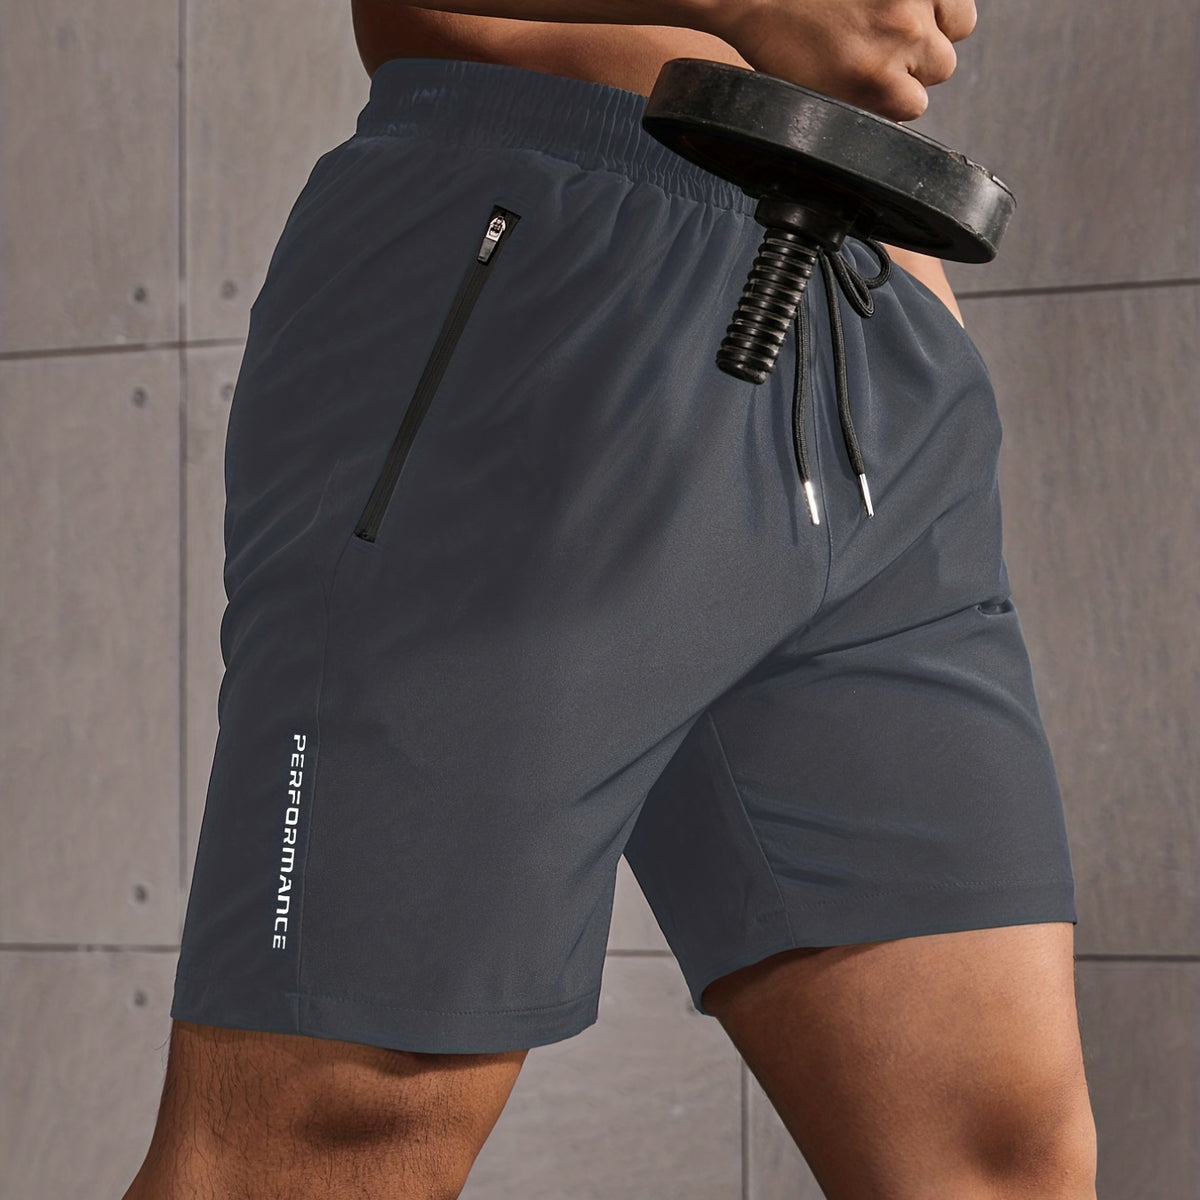 Quick Drying Comfy Shorts, Men's Casual Letter Print Zipper Pockets Waist Drawstring Athletic Shorts For Summer Gym Workout